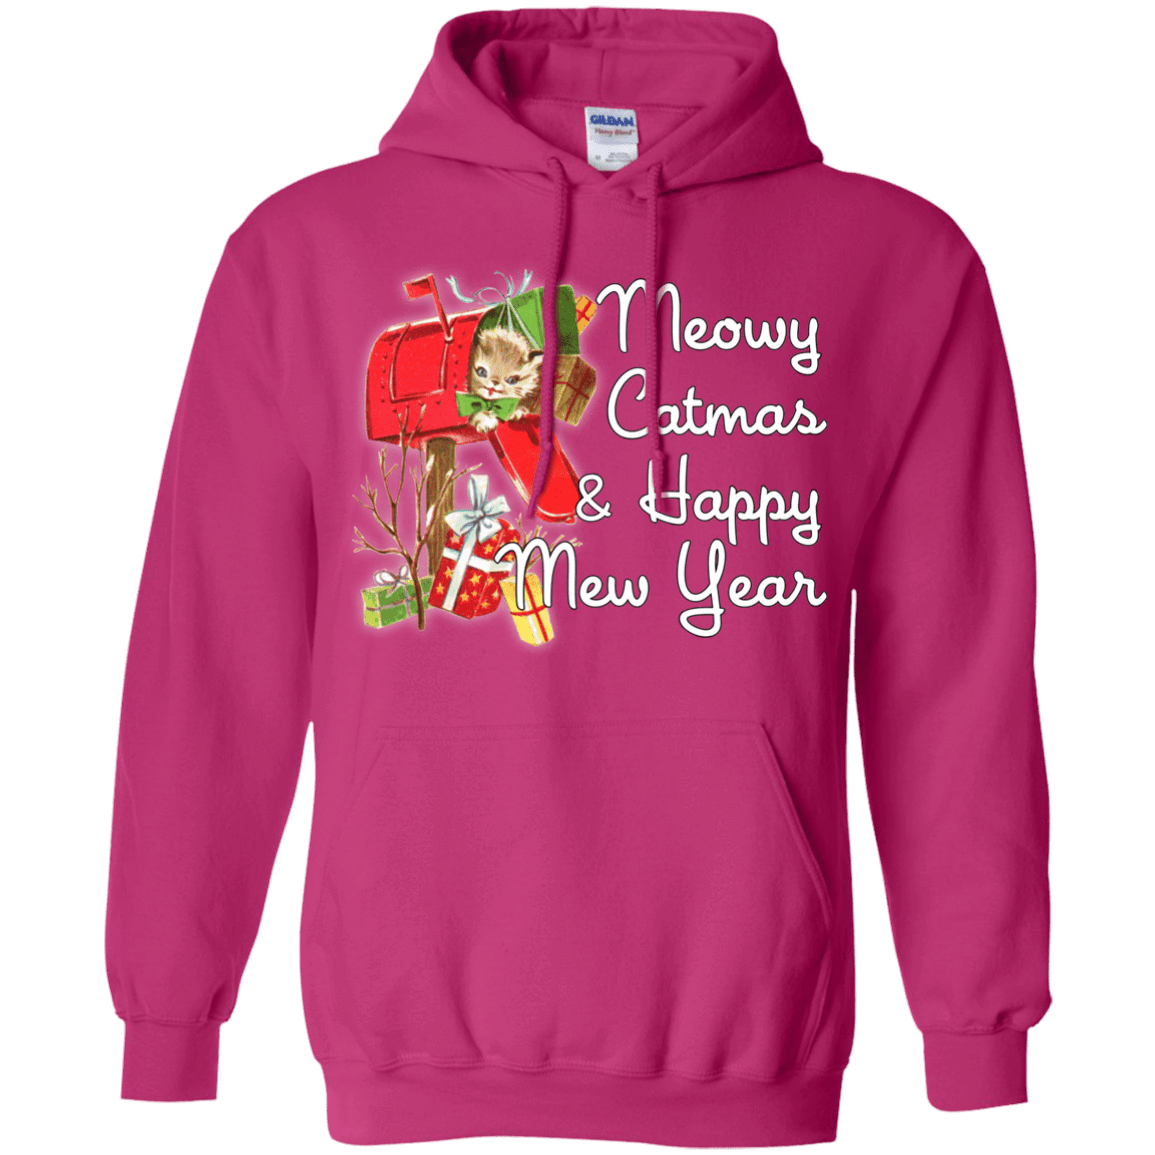 Sweatshirts Heliconia / Small Meowy Catmas Pullover Hoodie